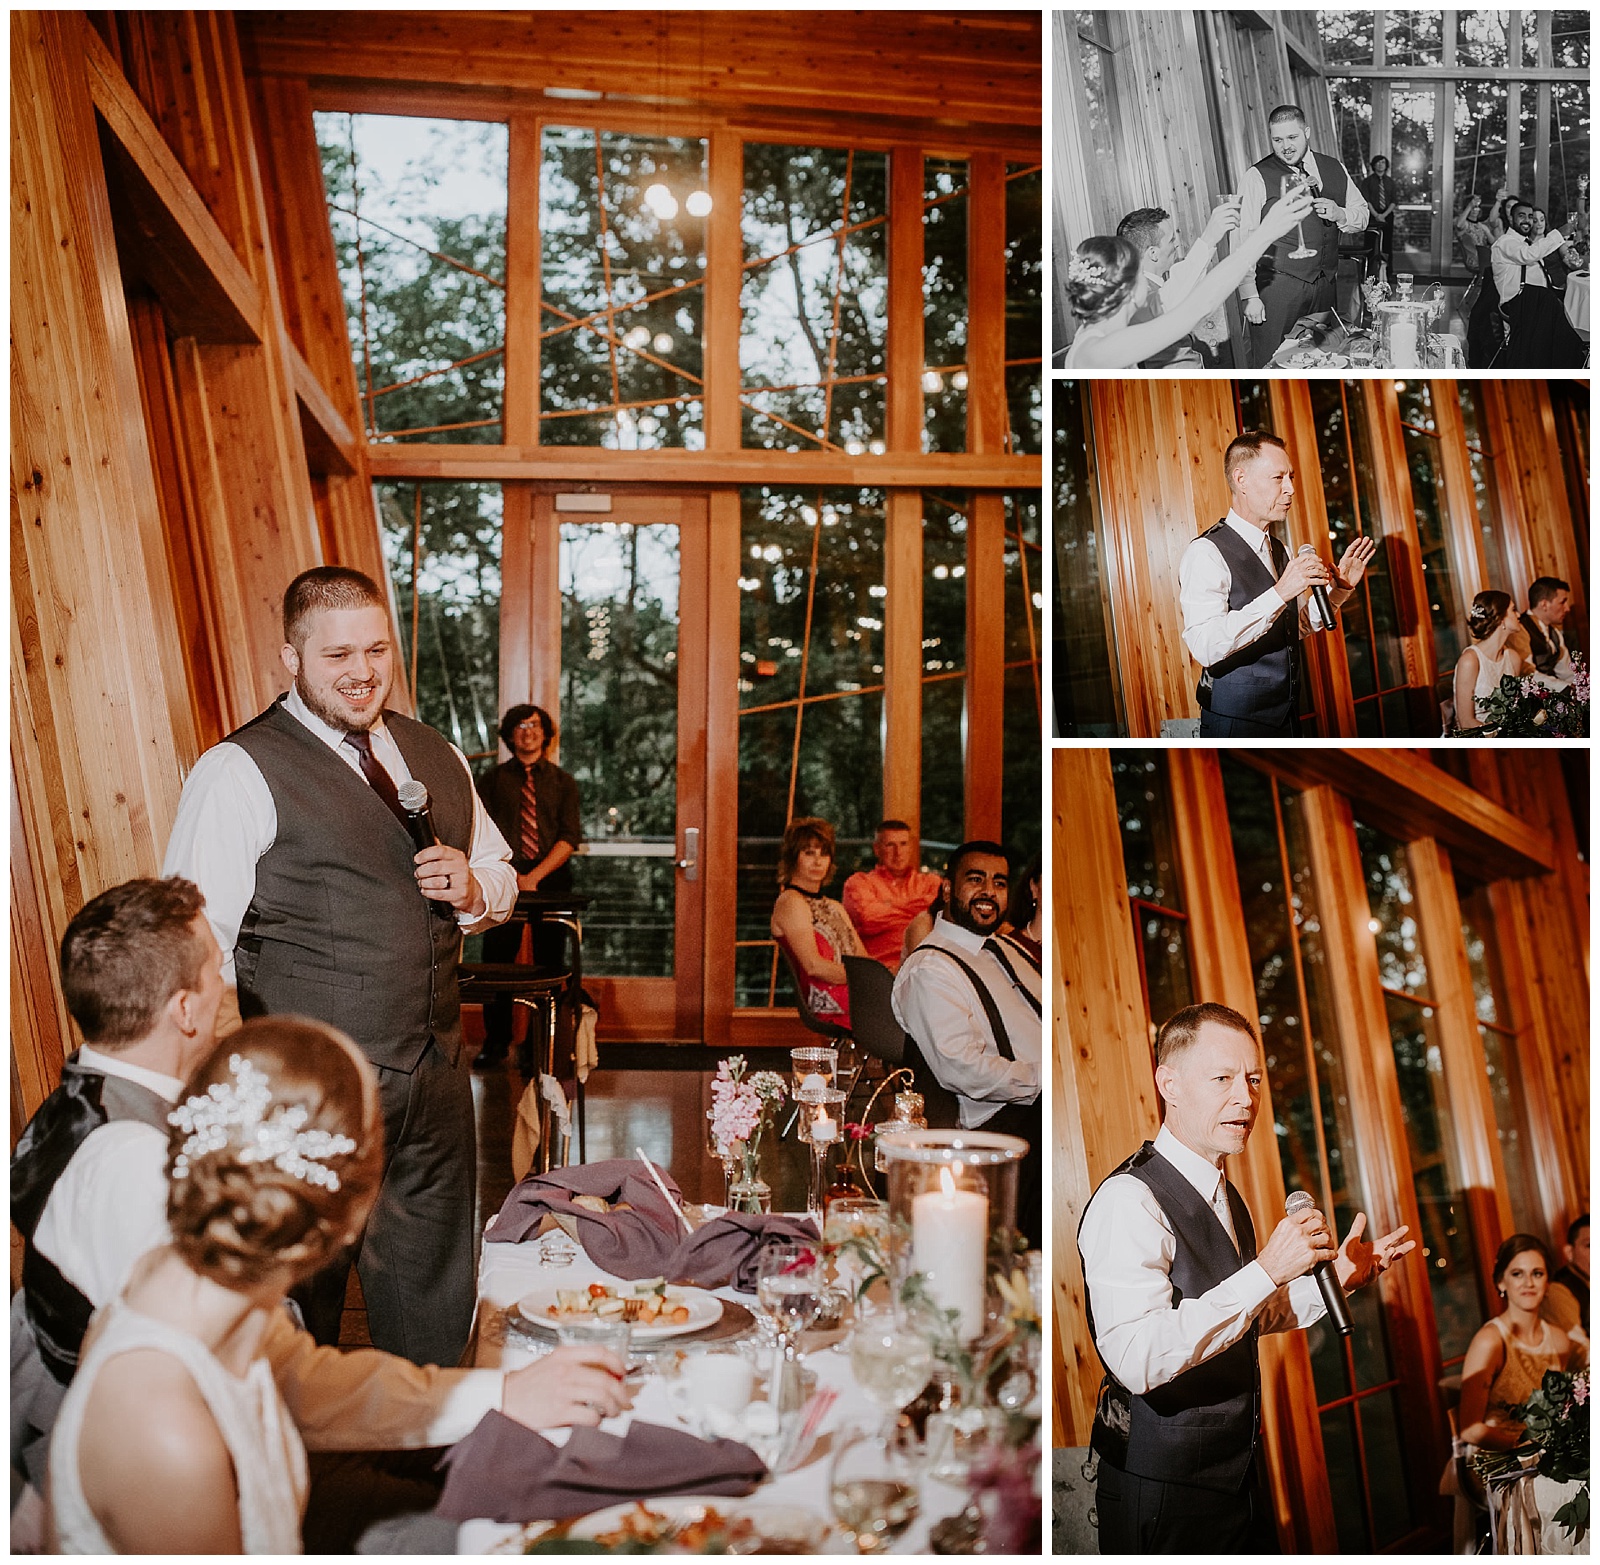 Liv Lyszyk Photograph at Bissell Tree House in Grand Rapids Michigan Photographer Wedding Photography